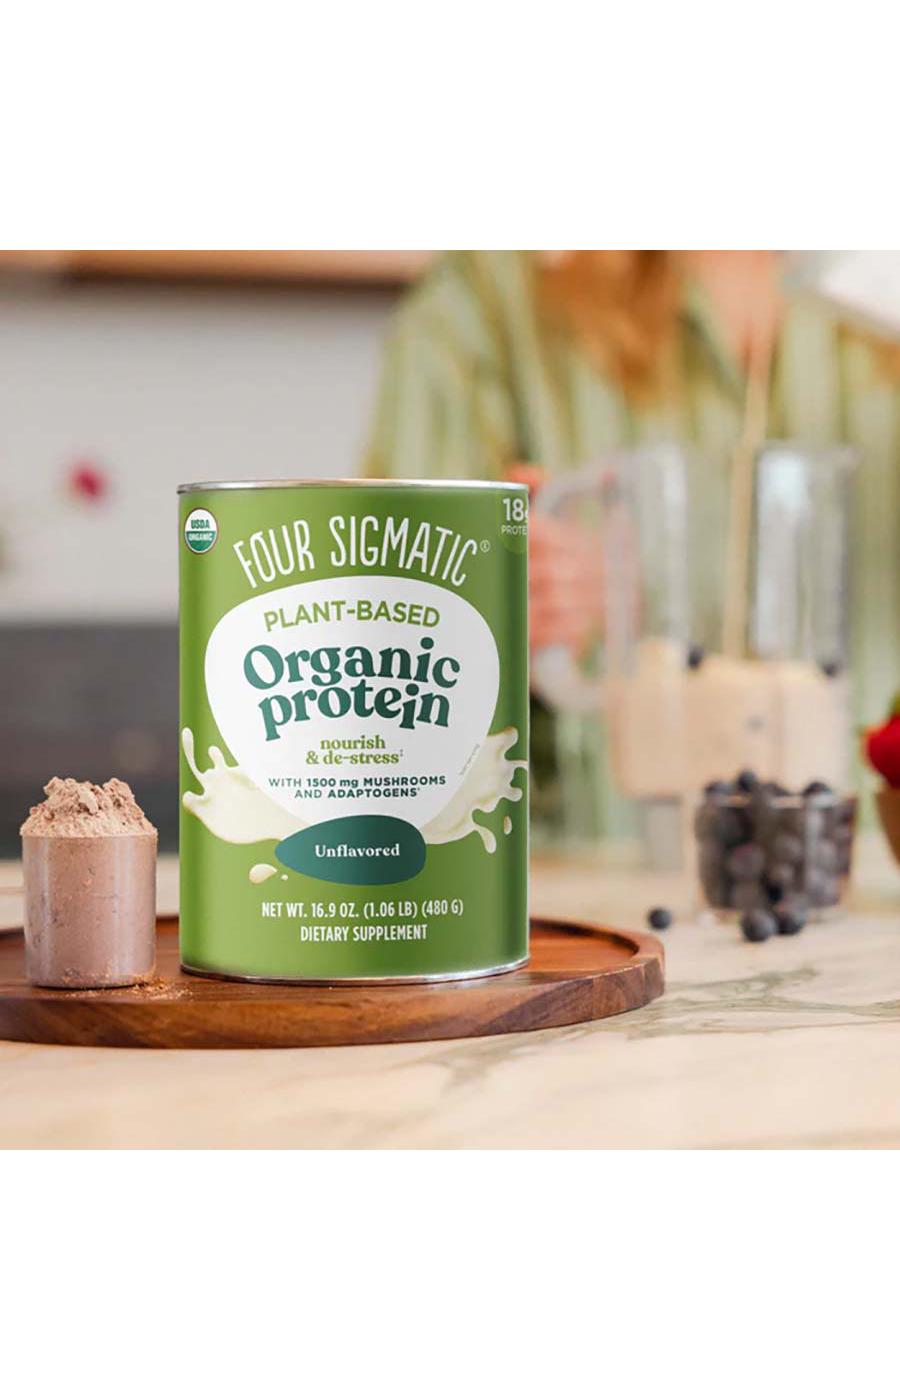 Four Sigmatic Plant-Based Organic 18g Protein Powder - Unflavored; image 3 of 4